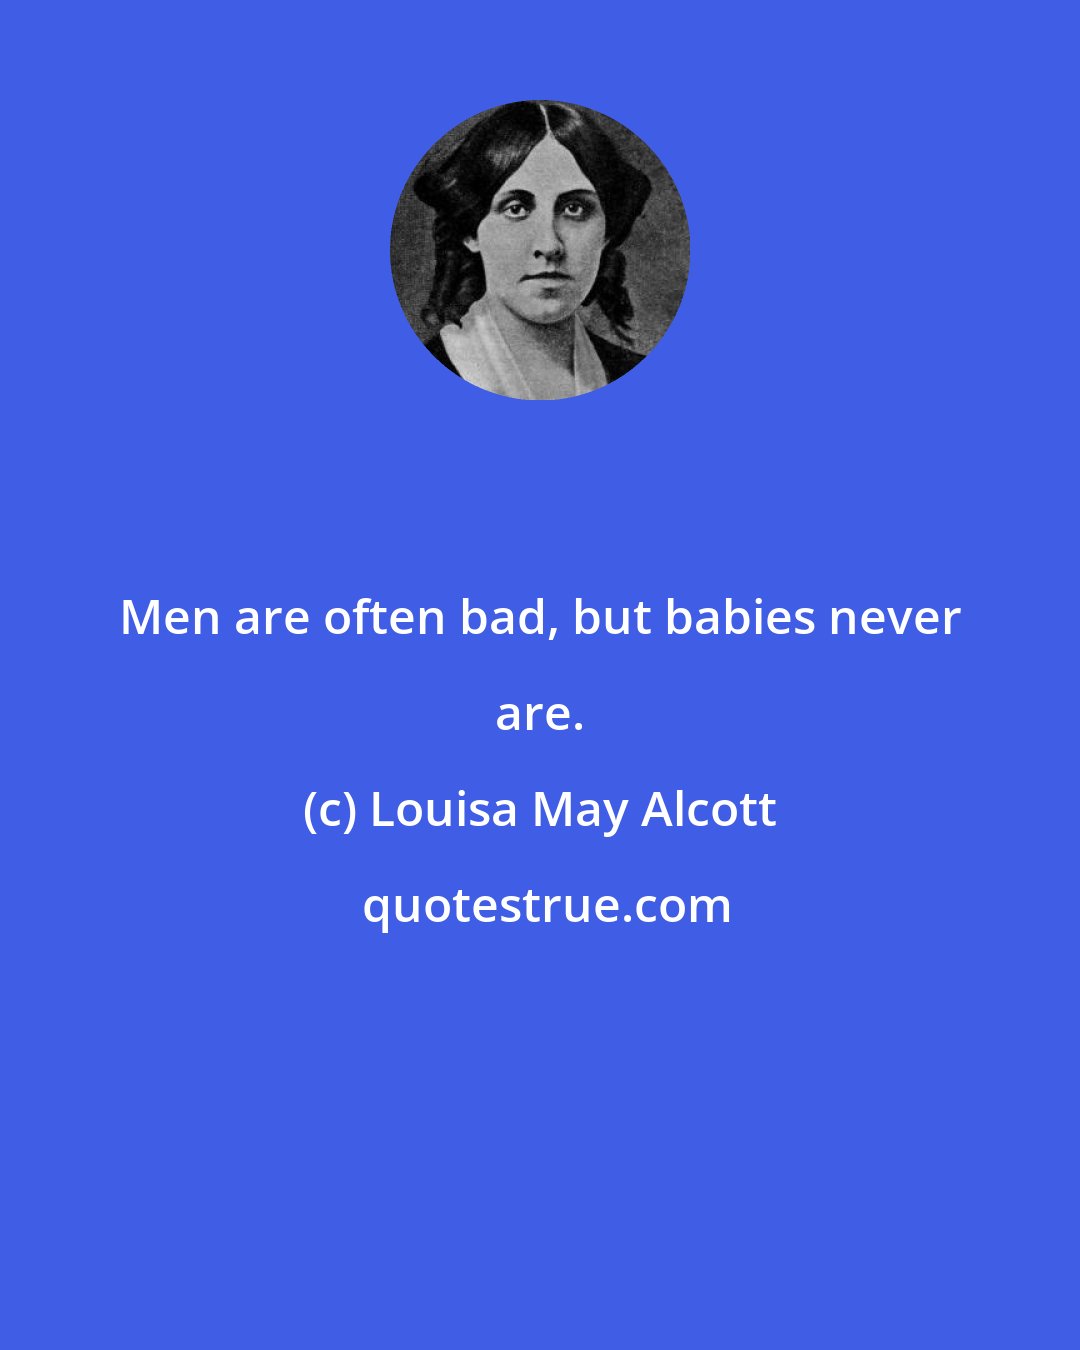 Louisa May Alcott: Men are often bad, but babies never are.